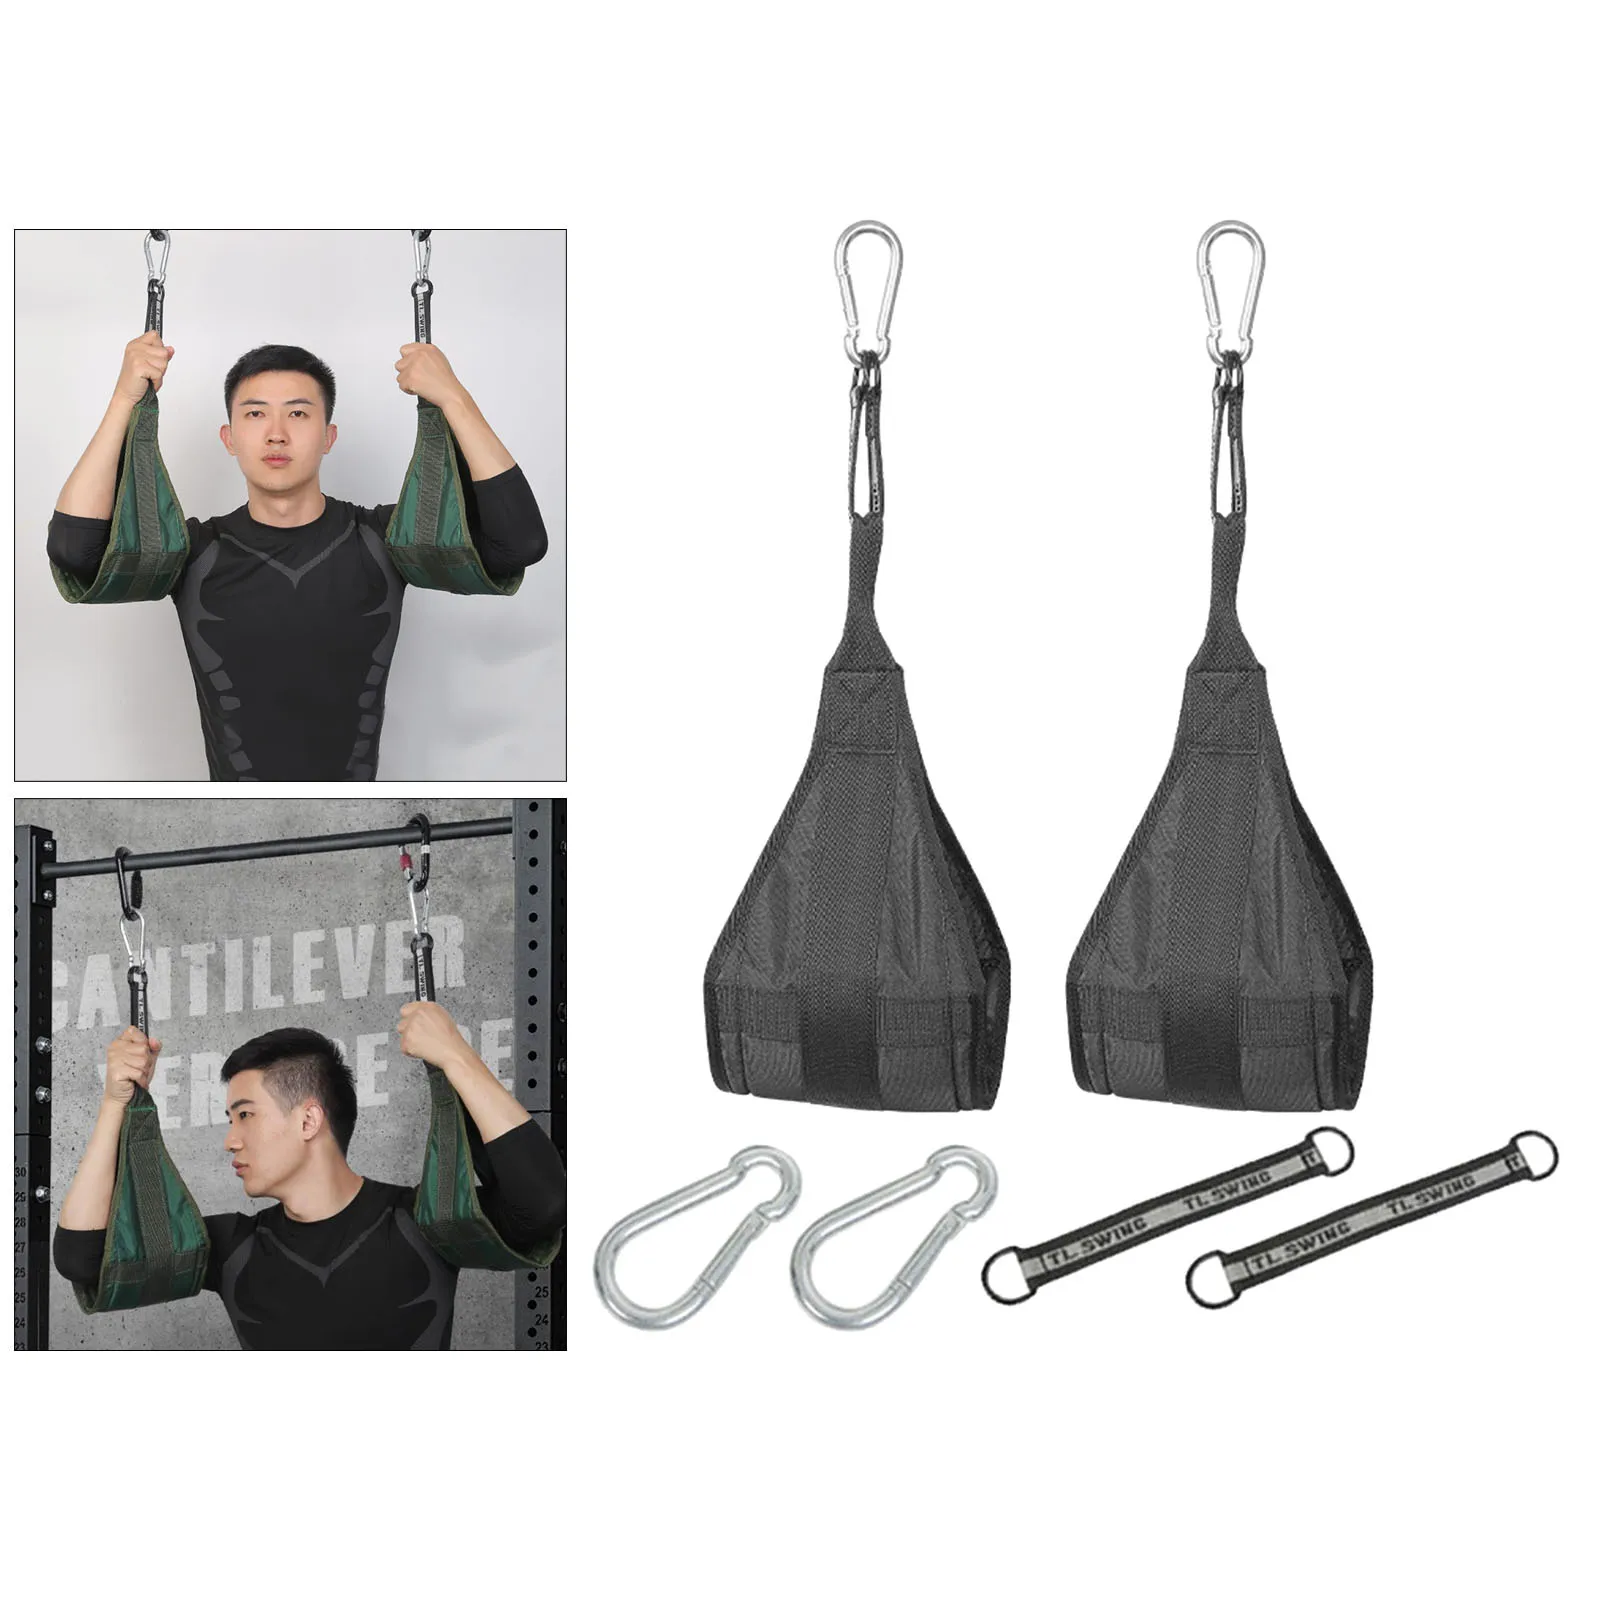 Fitness Ab Straps Exercising Gear Hanging Hanging Ab Straps Ab Strap for Men and Women Chinning Core Strength Bar Gym